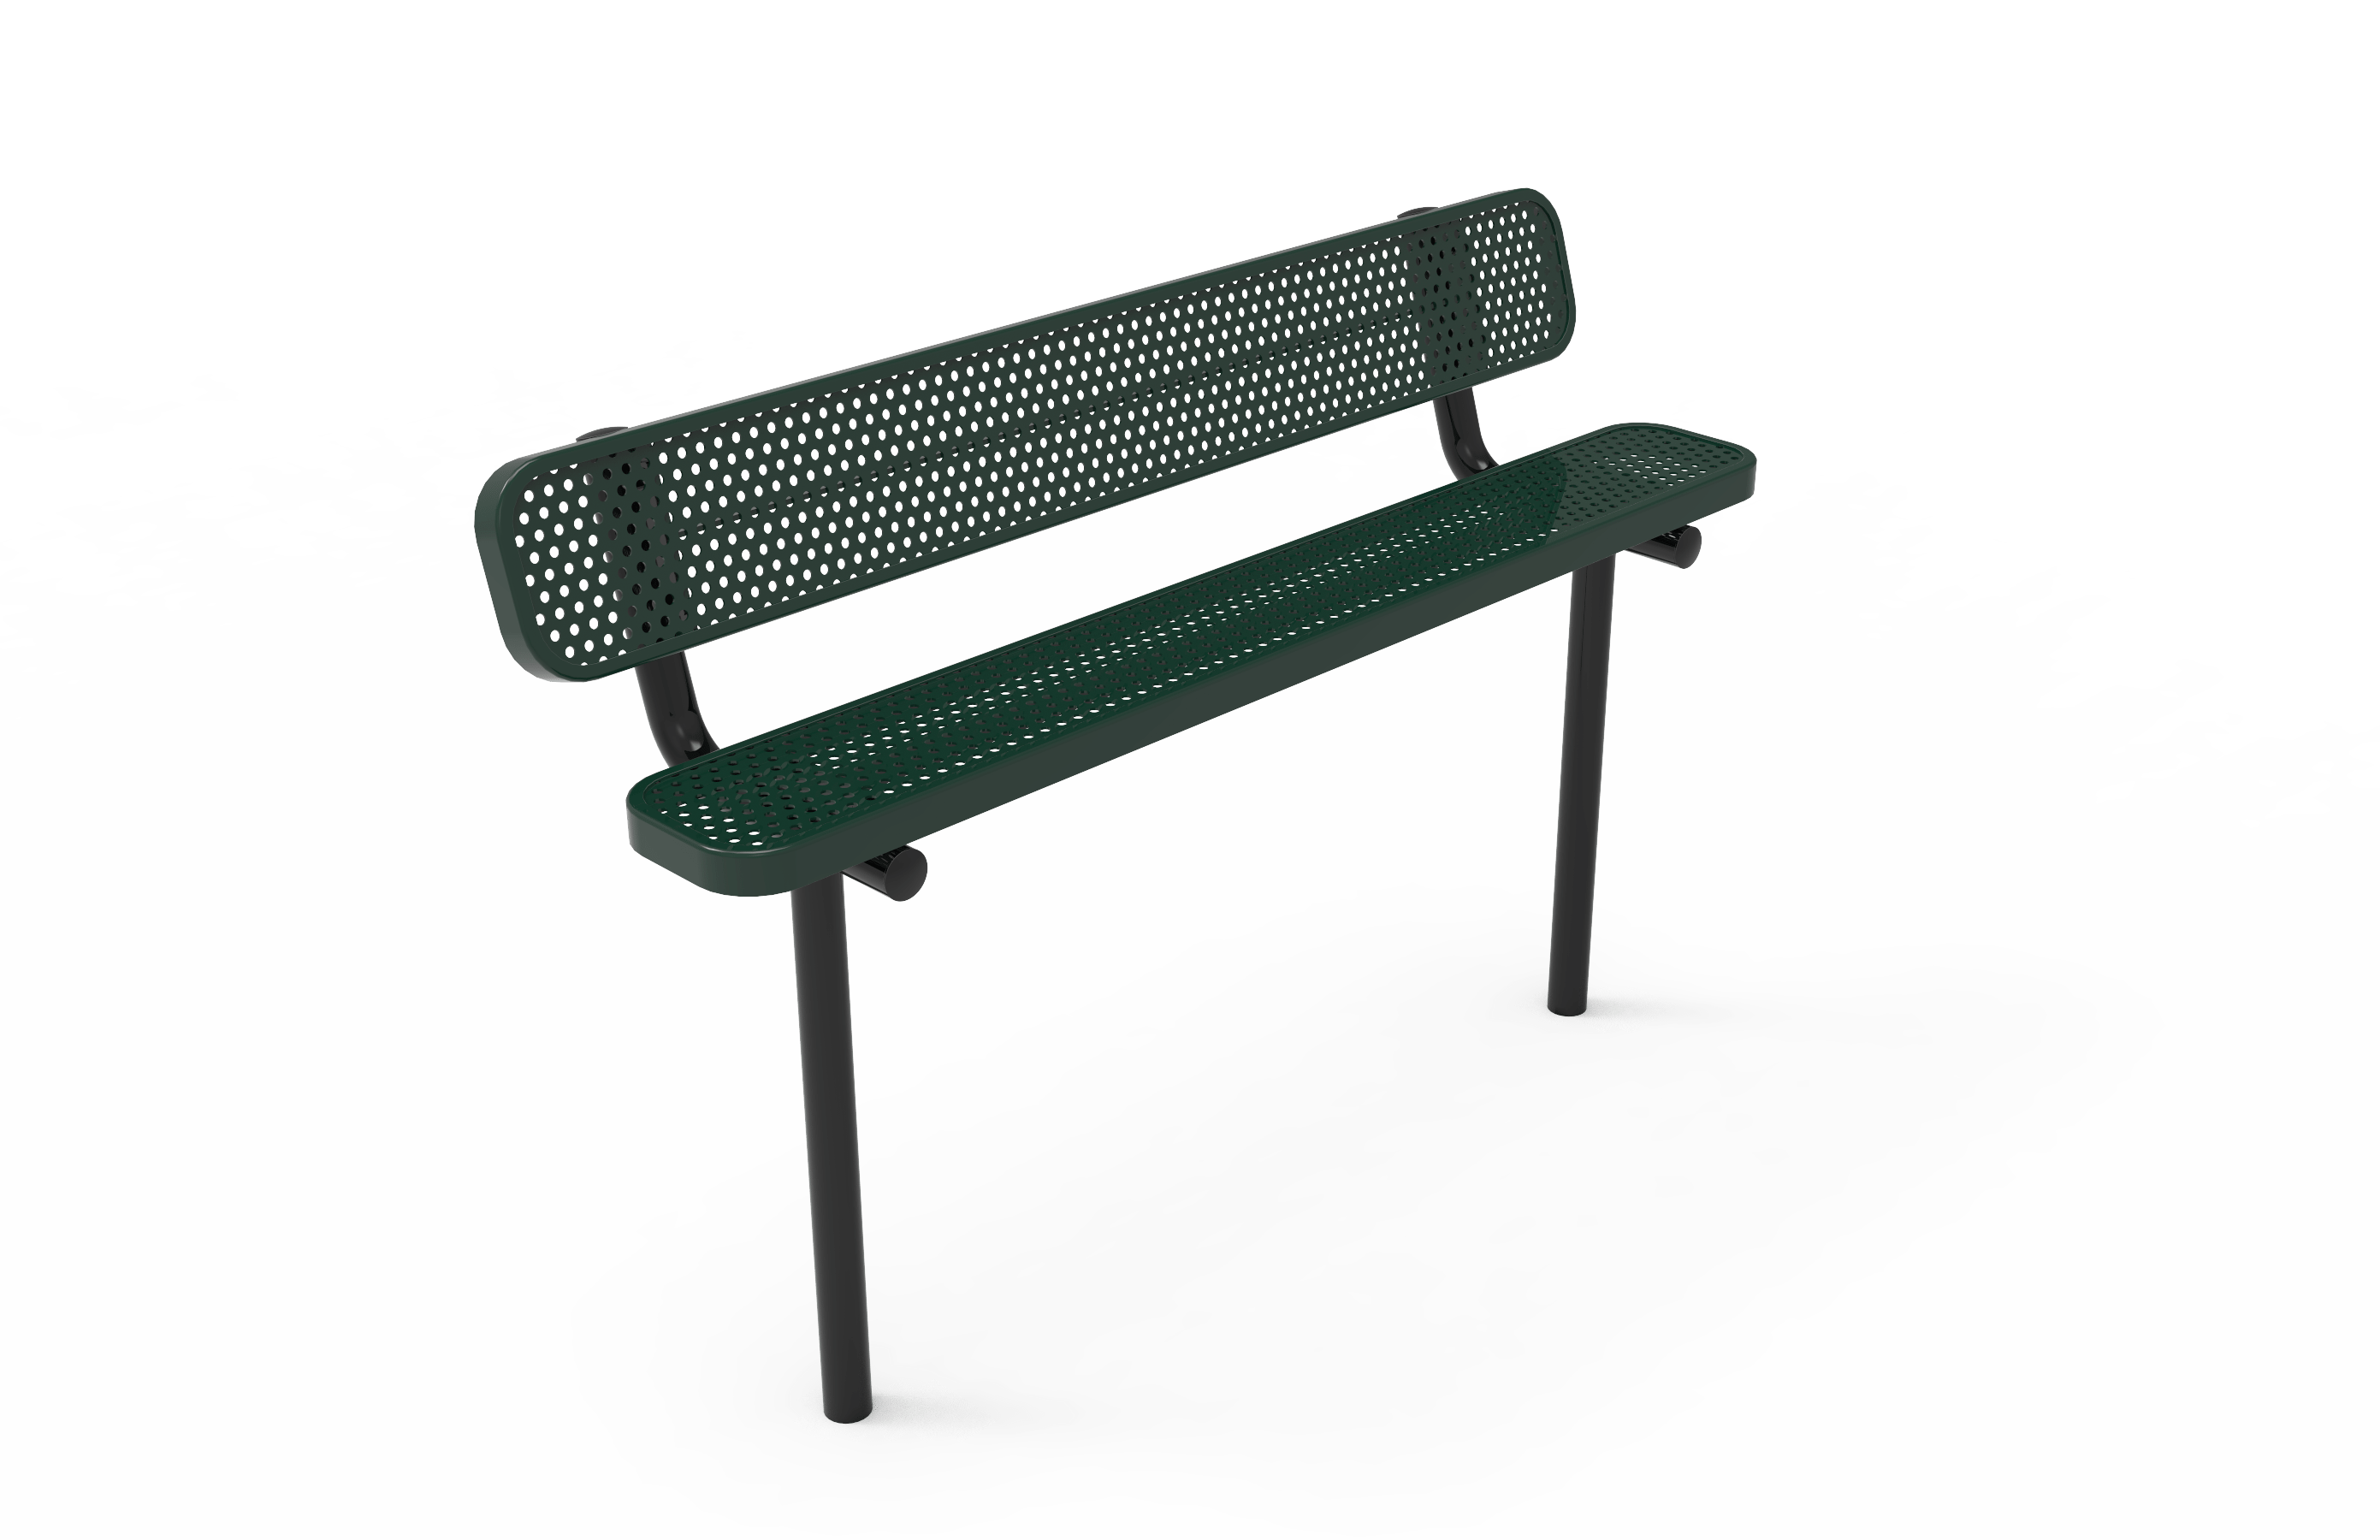 8′ Standard Bench With Back-Punched
BRT08-D-19-000
Industry Standard Finish
$669.00
BRT08-B-19-000
Advantage Premium Finish
$819.00
